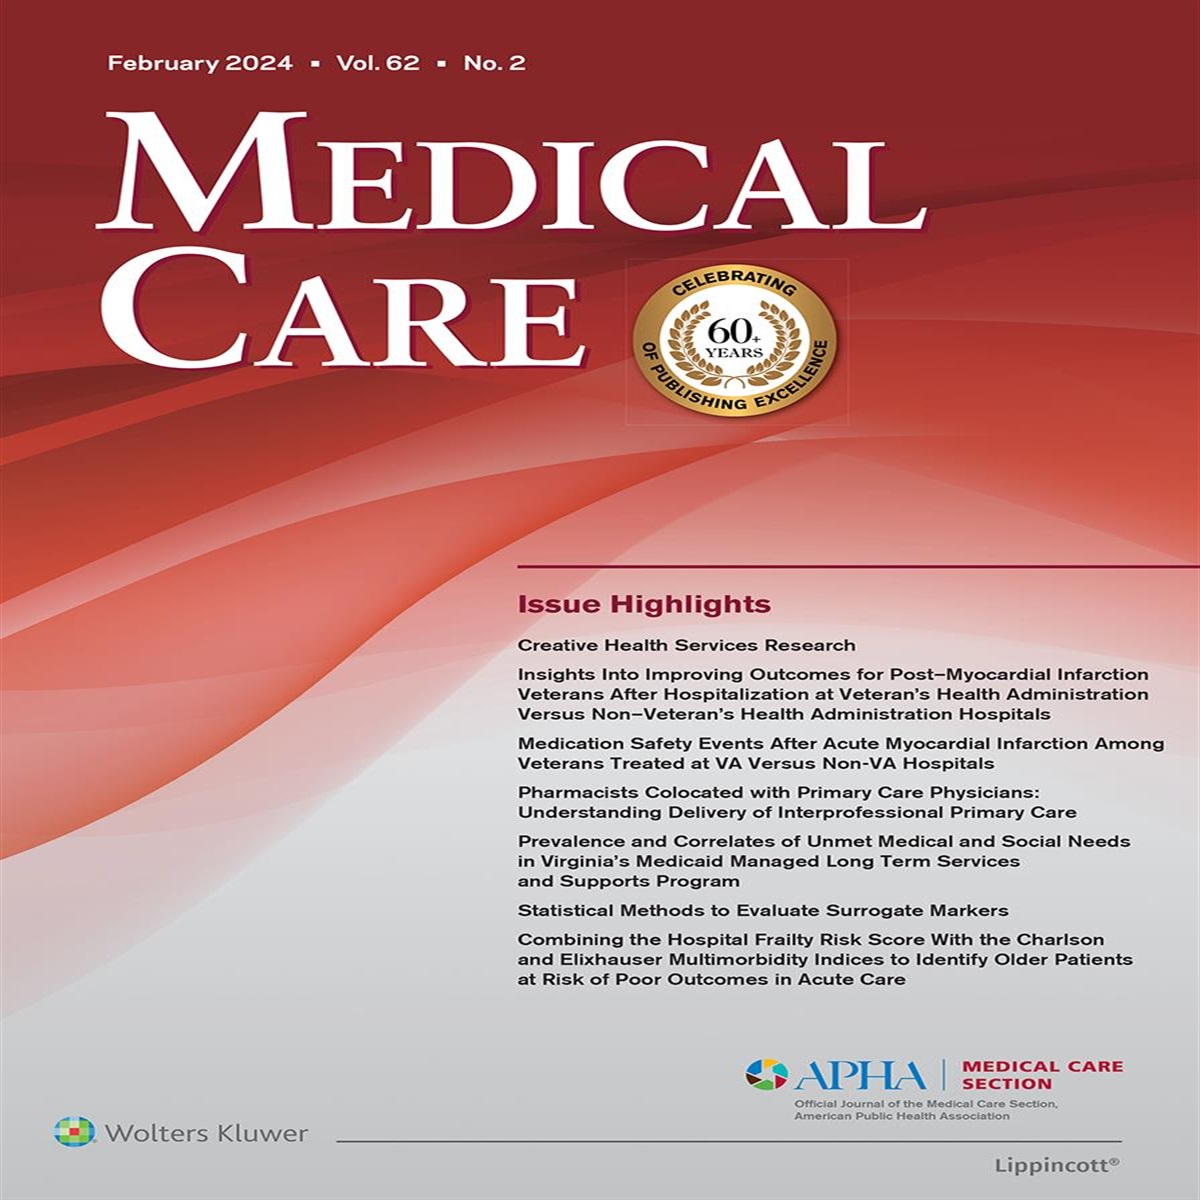 Insights Into Improving Outcomes for Post–Myocardial Infarction Veterans After Hospitalization at Veteran’s Health Administration Versus Non–Veteran’s Health Administration Hospitals